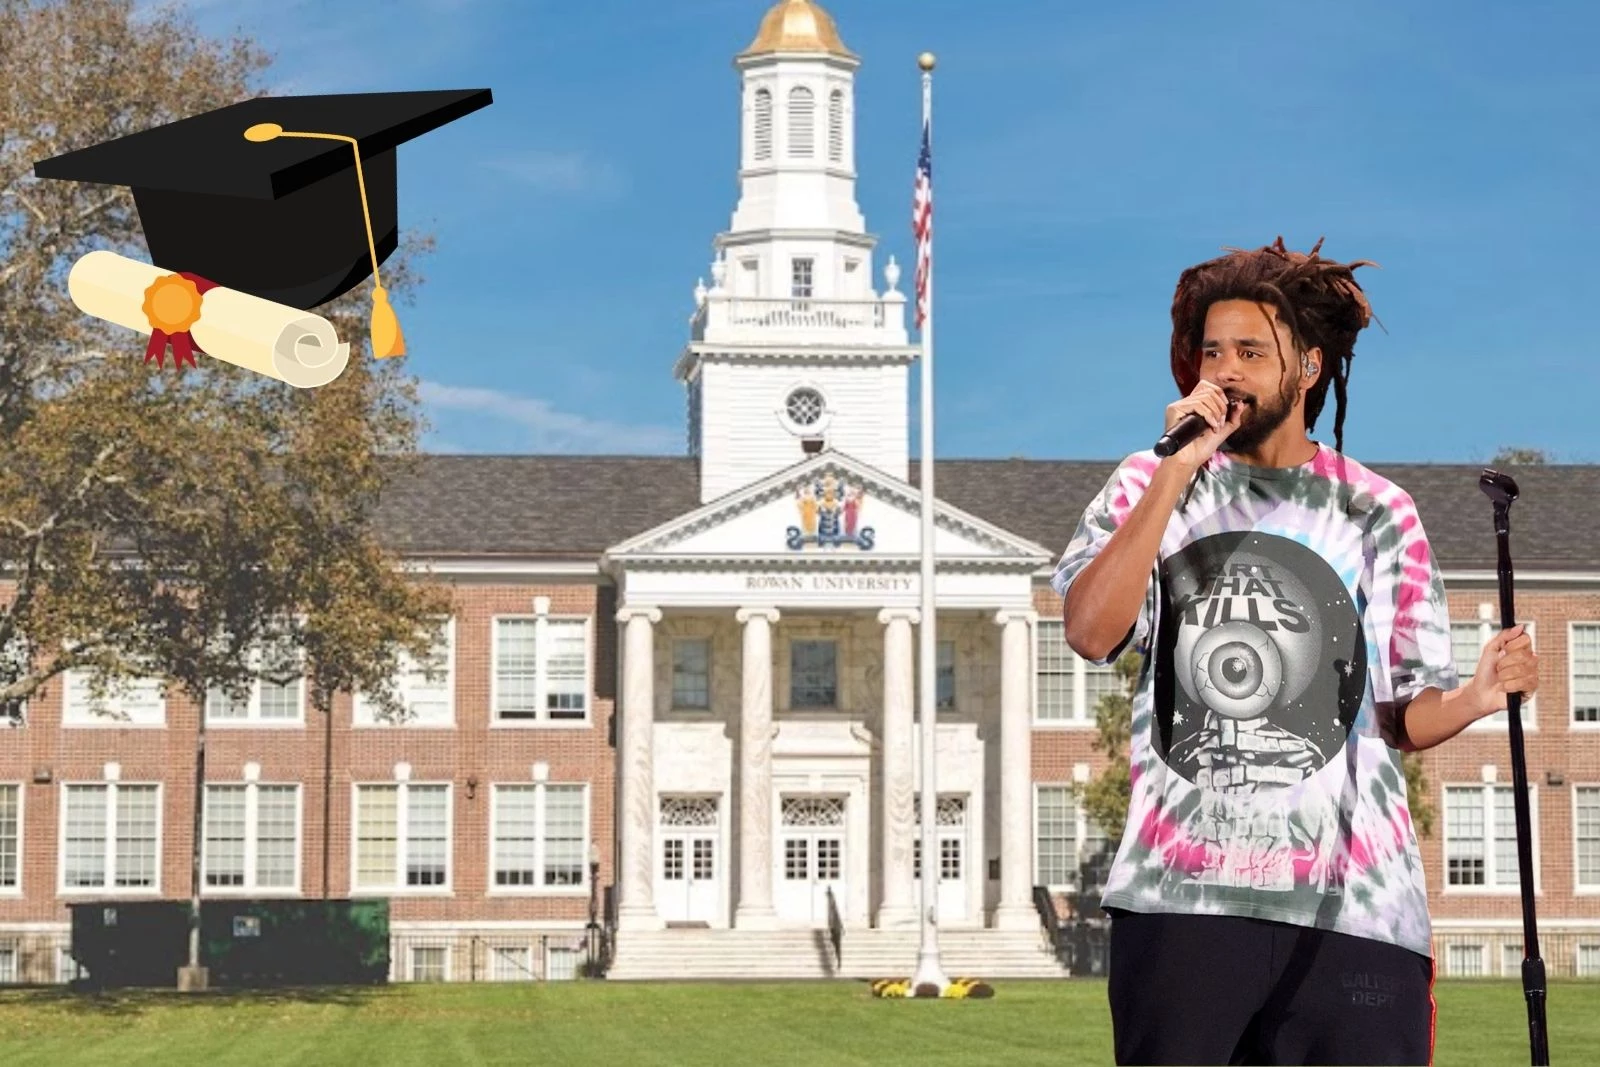 Rapper J. Cole Was Spotted At Rowan University's Graduation Ceremony  Yesterday